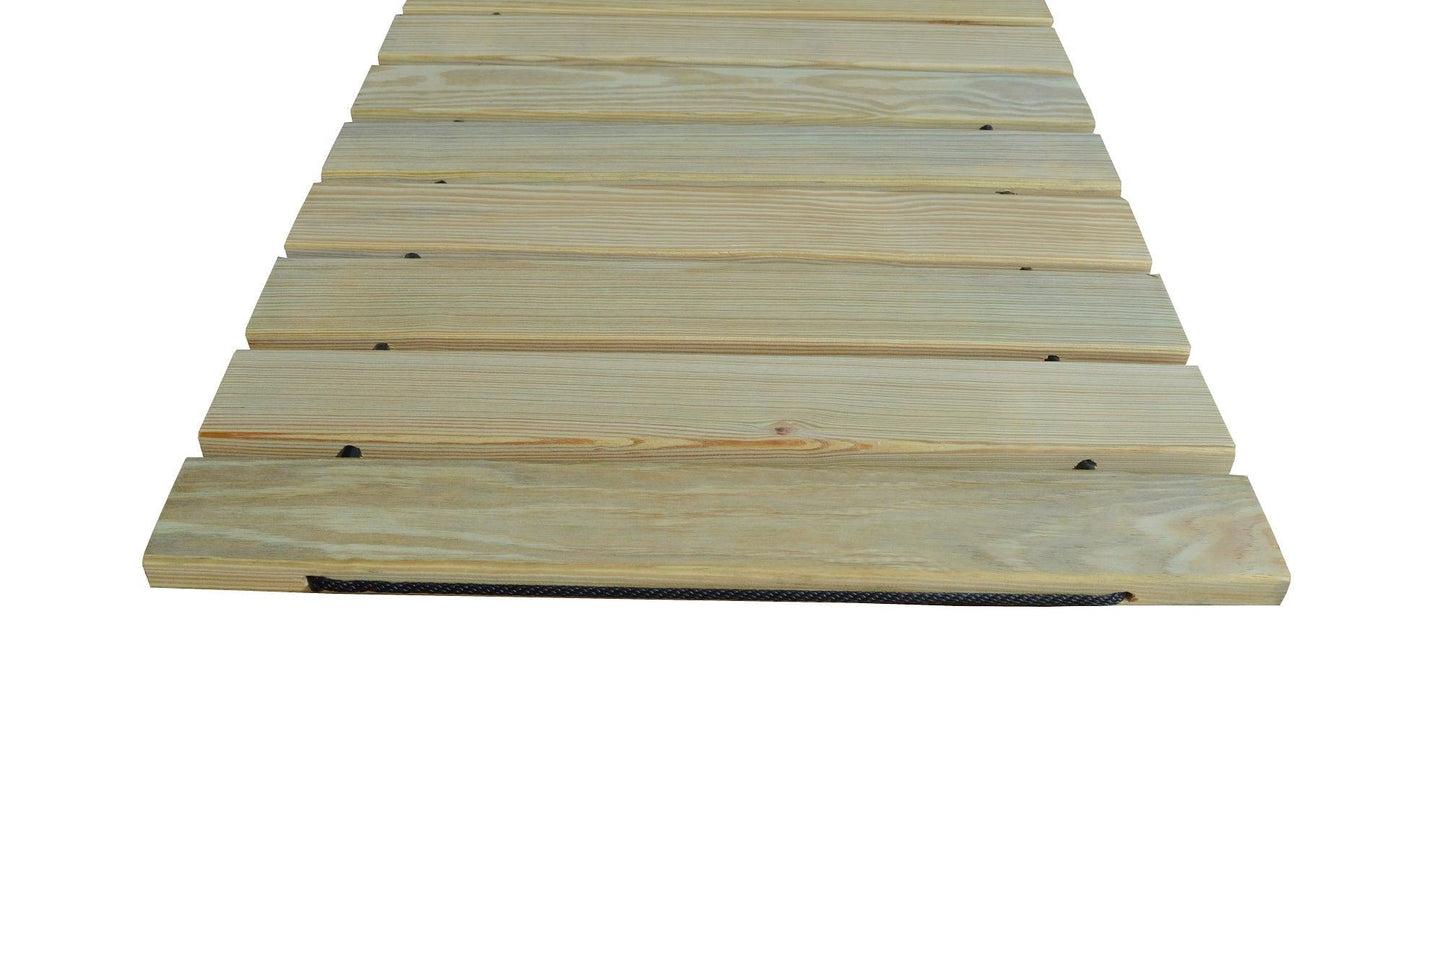 A&L Furniture Co. Pressure Treated Pine 2' x 3' Walkway - LEAD TIME TO SHIP 10 BUSINESS DAYS